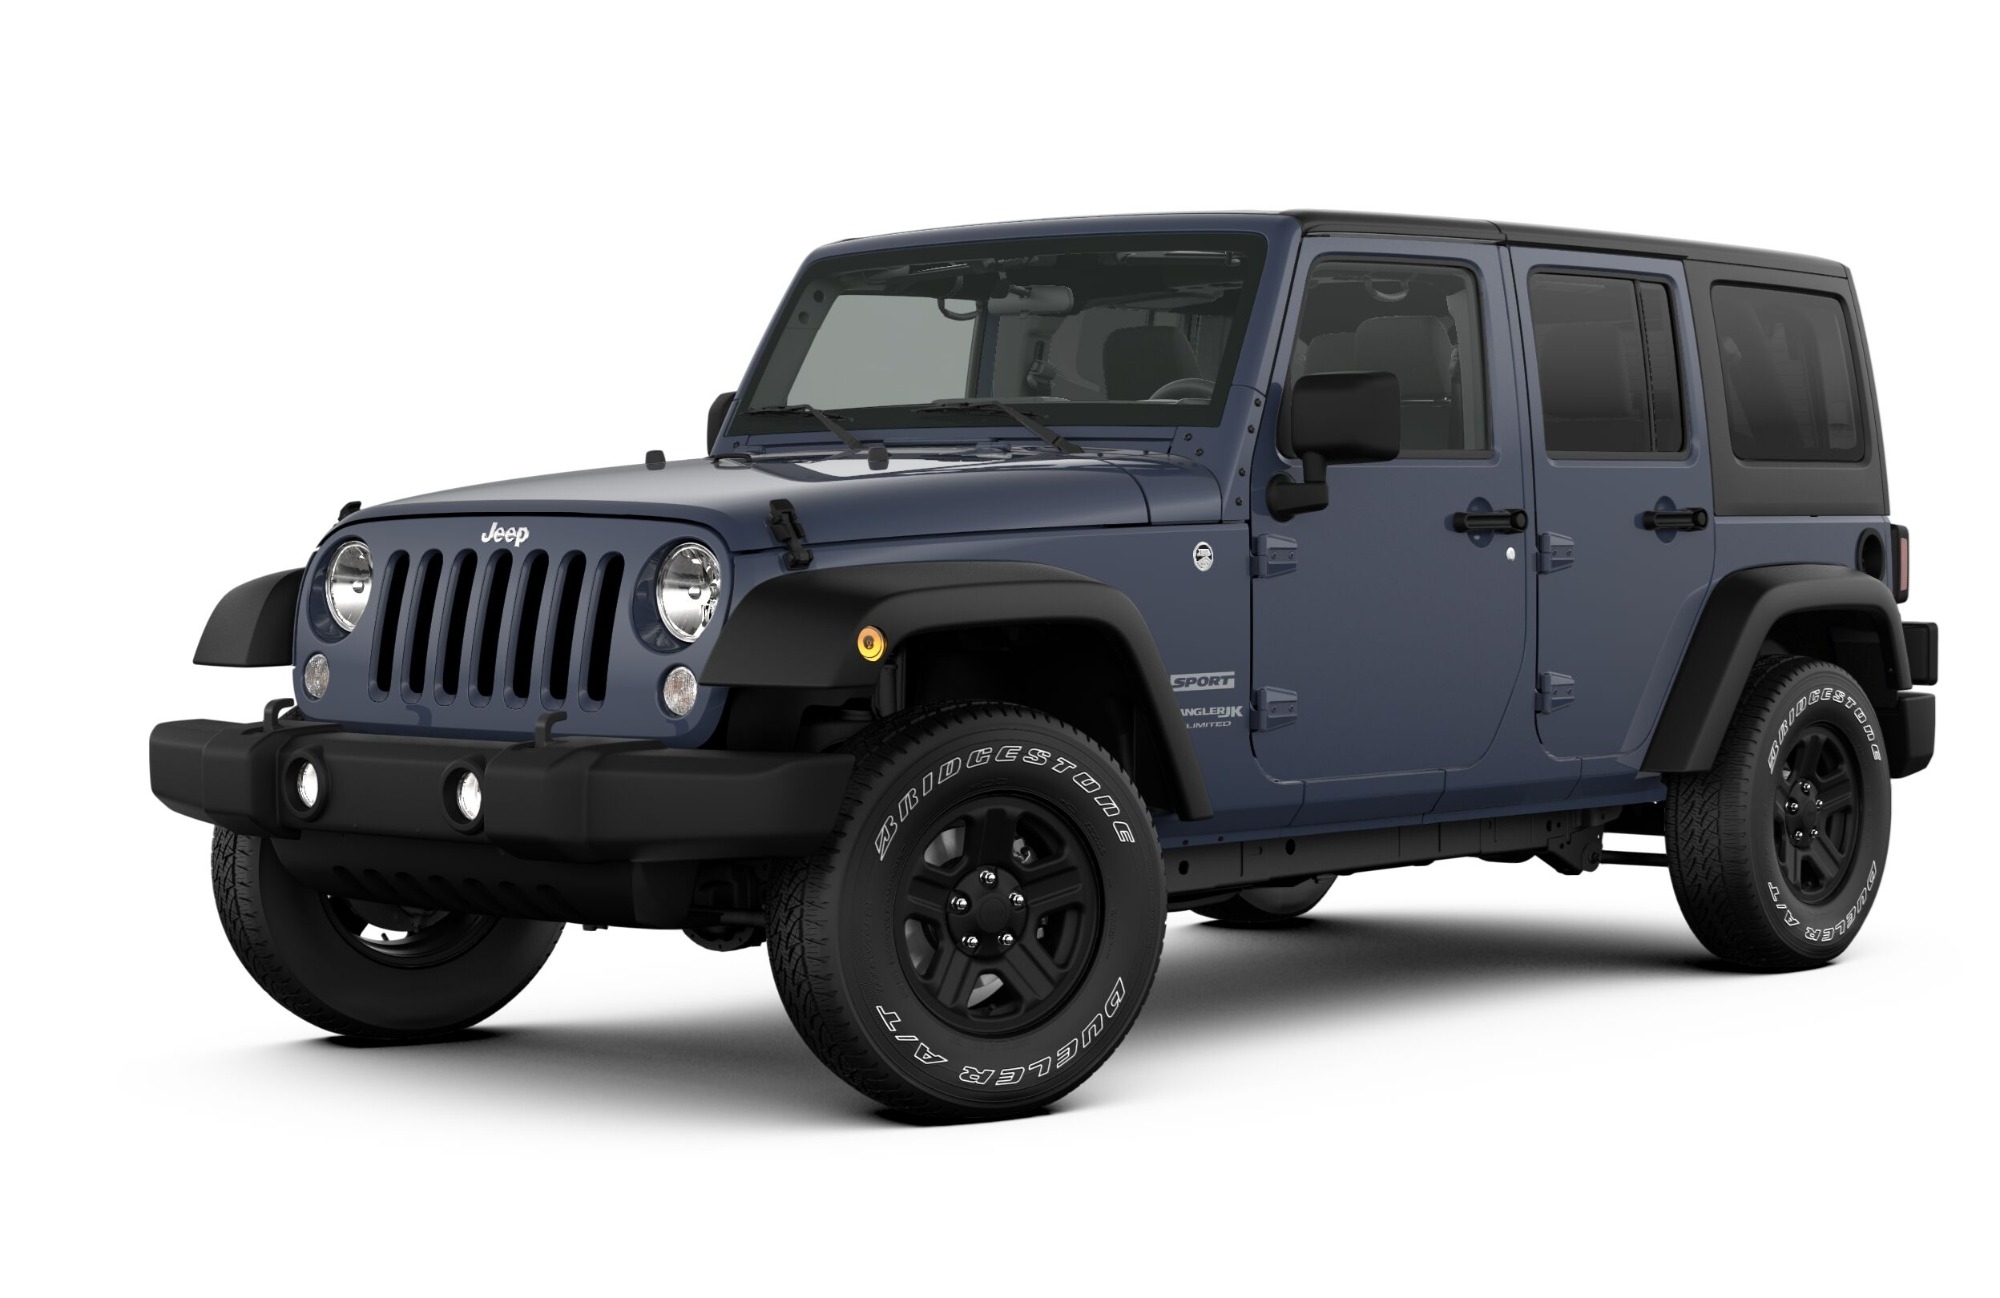 2018 Jeep Wrangler Unlimited JK Sport Full Specs, Features and Price |  CarBuzz